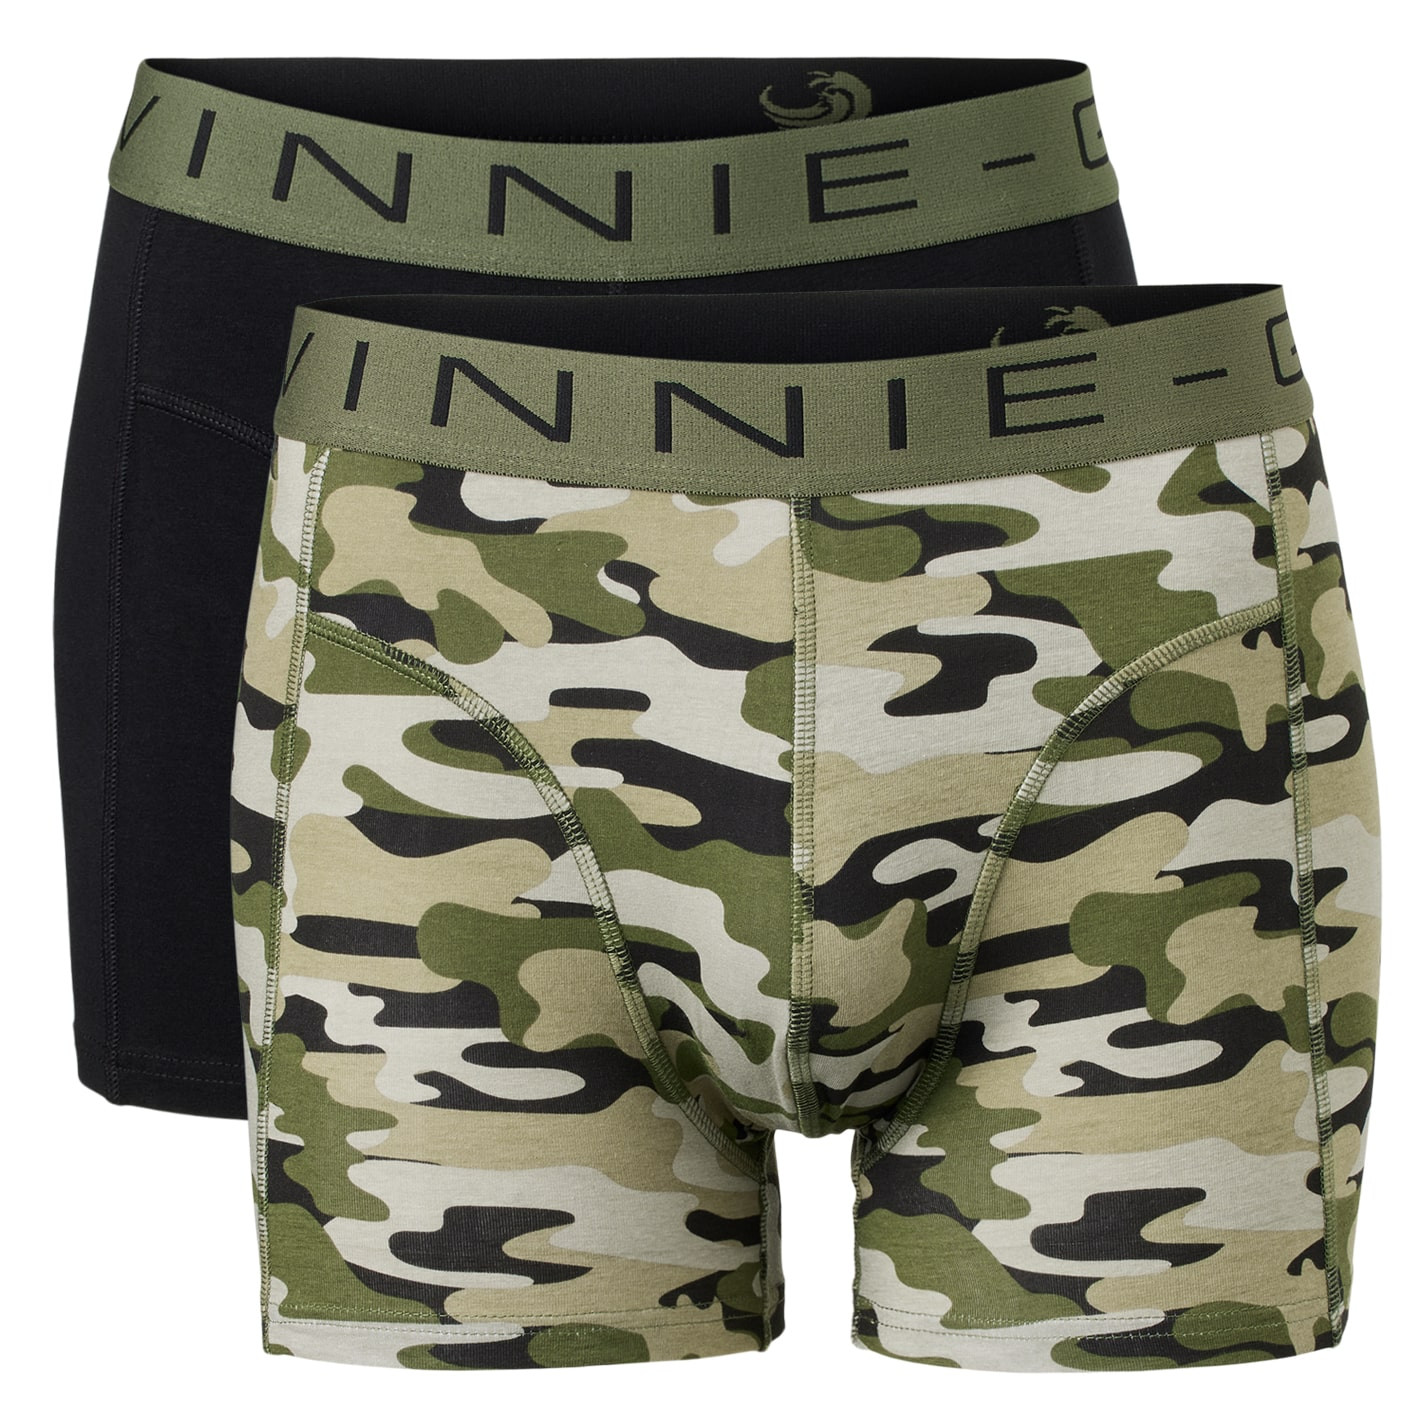 Vinnie-G Boxershorts 2-pack Black / Army Green Combo